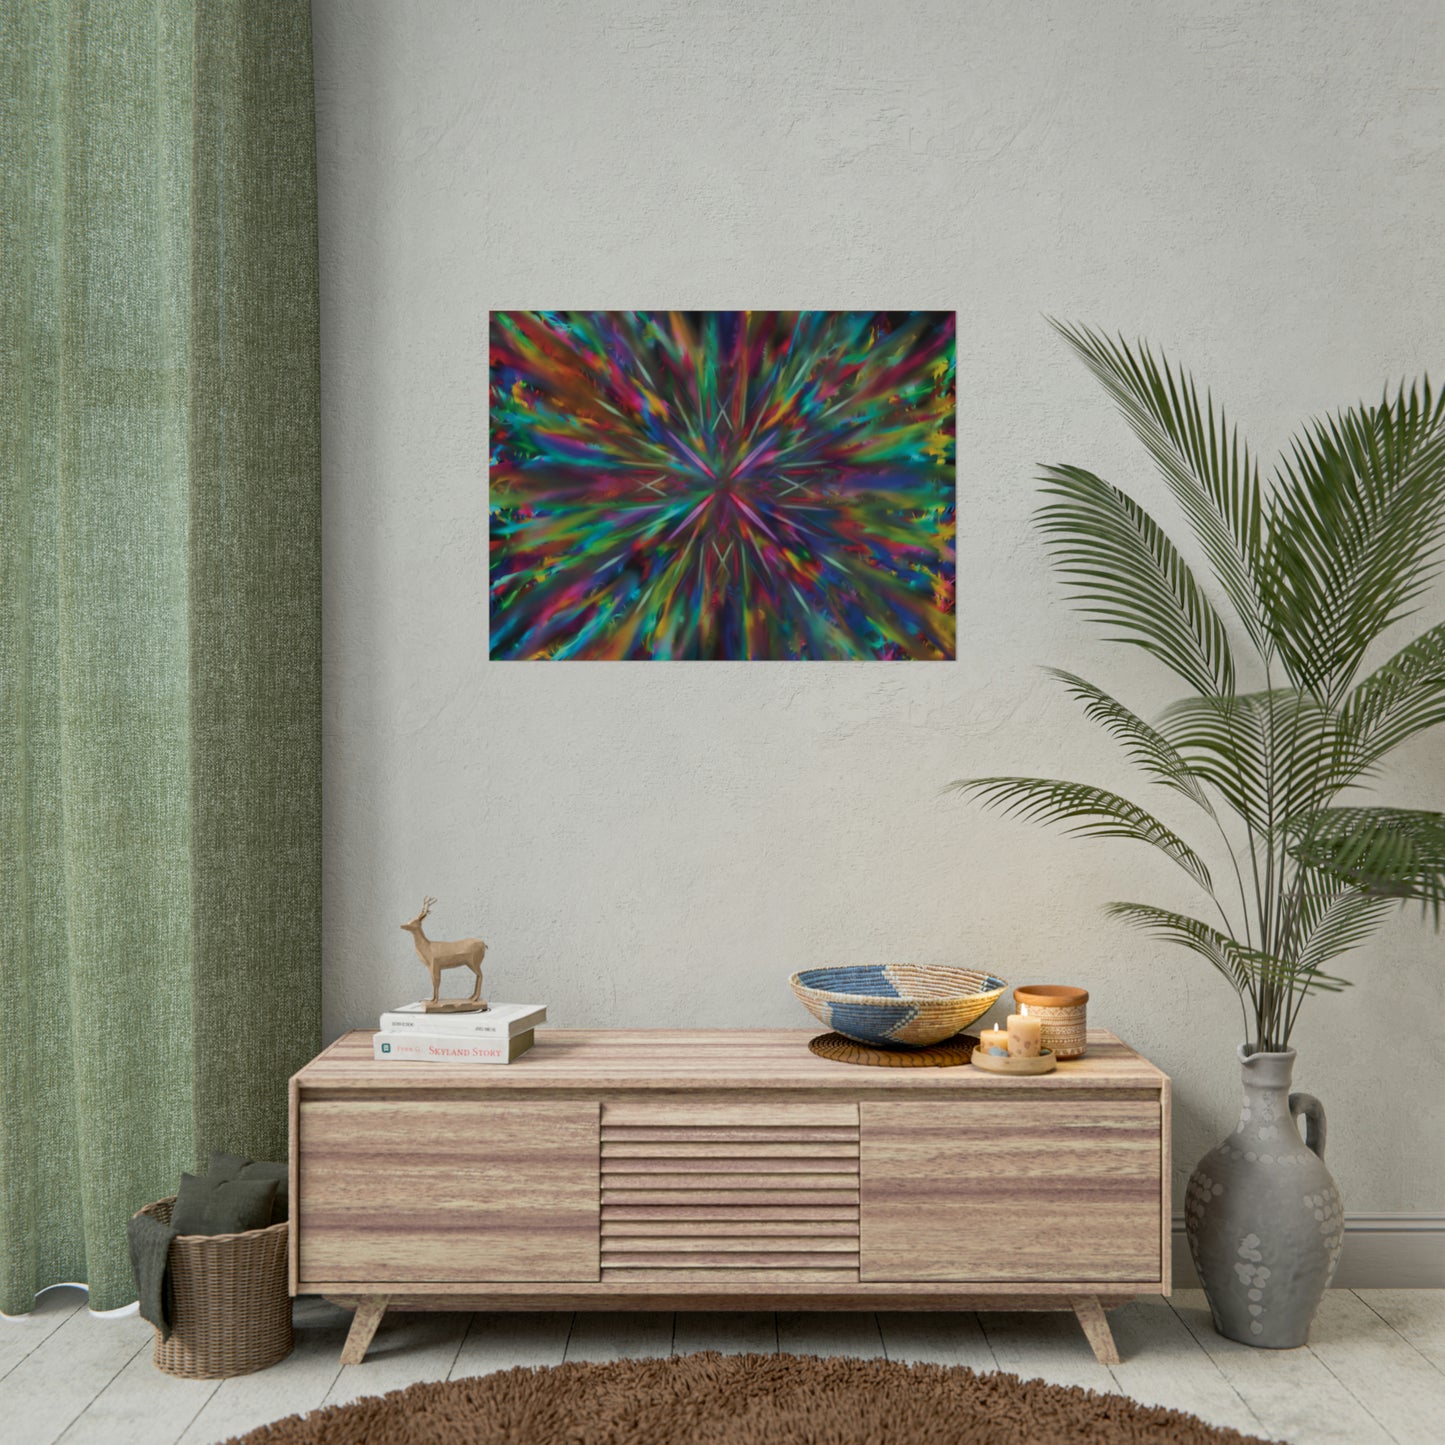 Star Explosion Energy Painting - Poster - Bright Colors